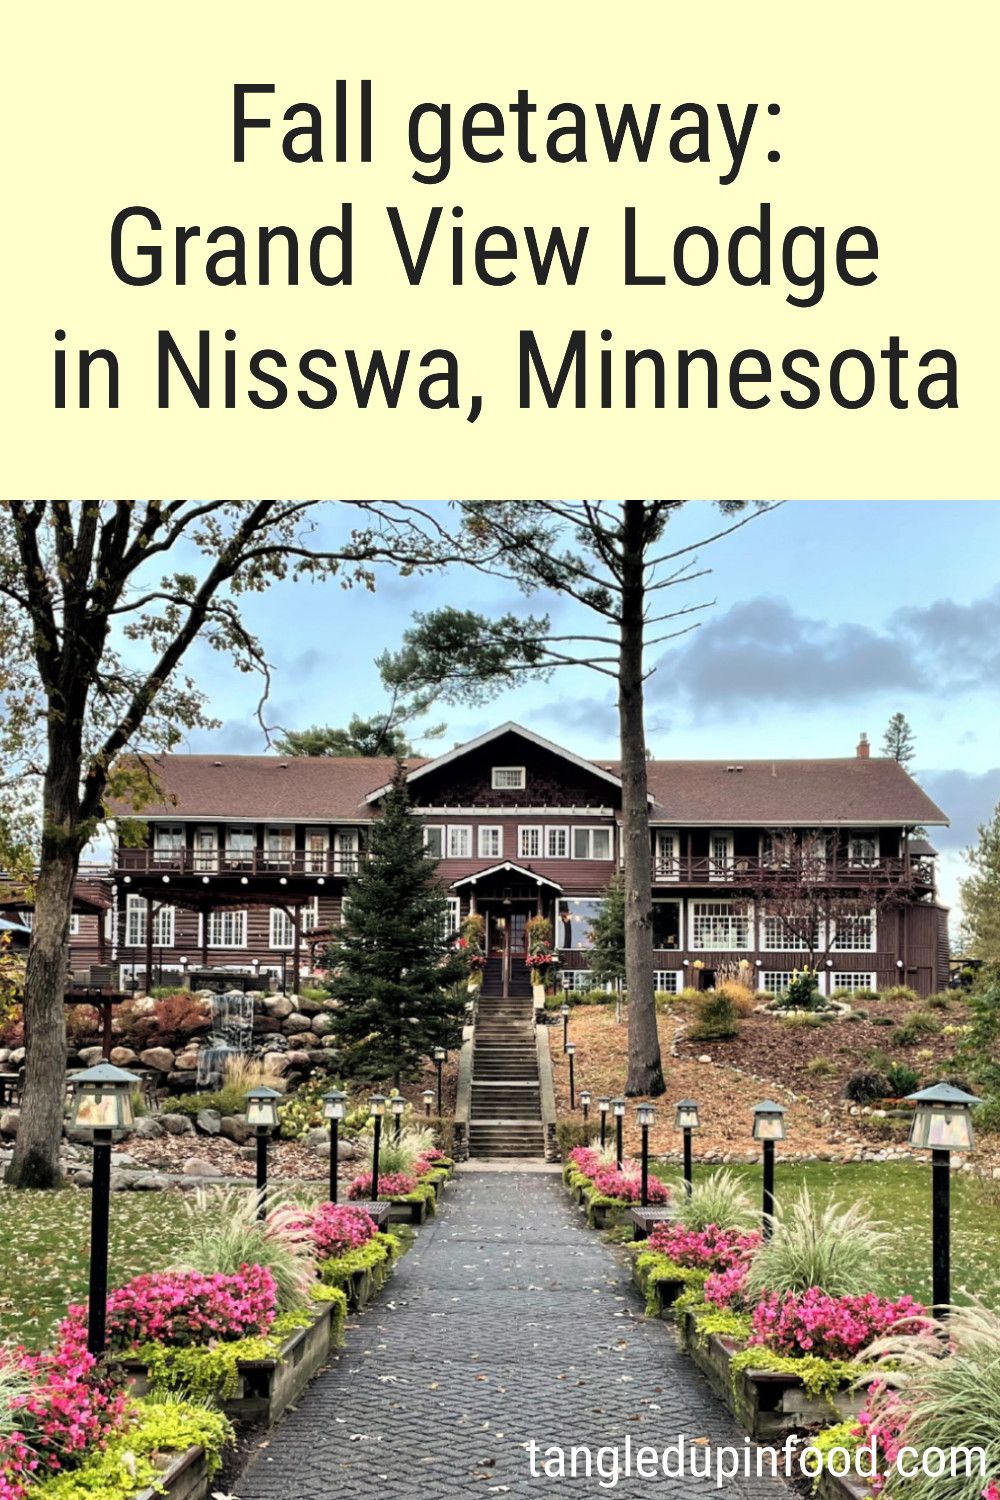 Photo of historic lodge building with text reading "Fall Getaway: Grand View Lodge in Nisswa, Minnesota"